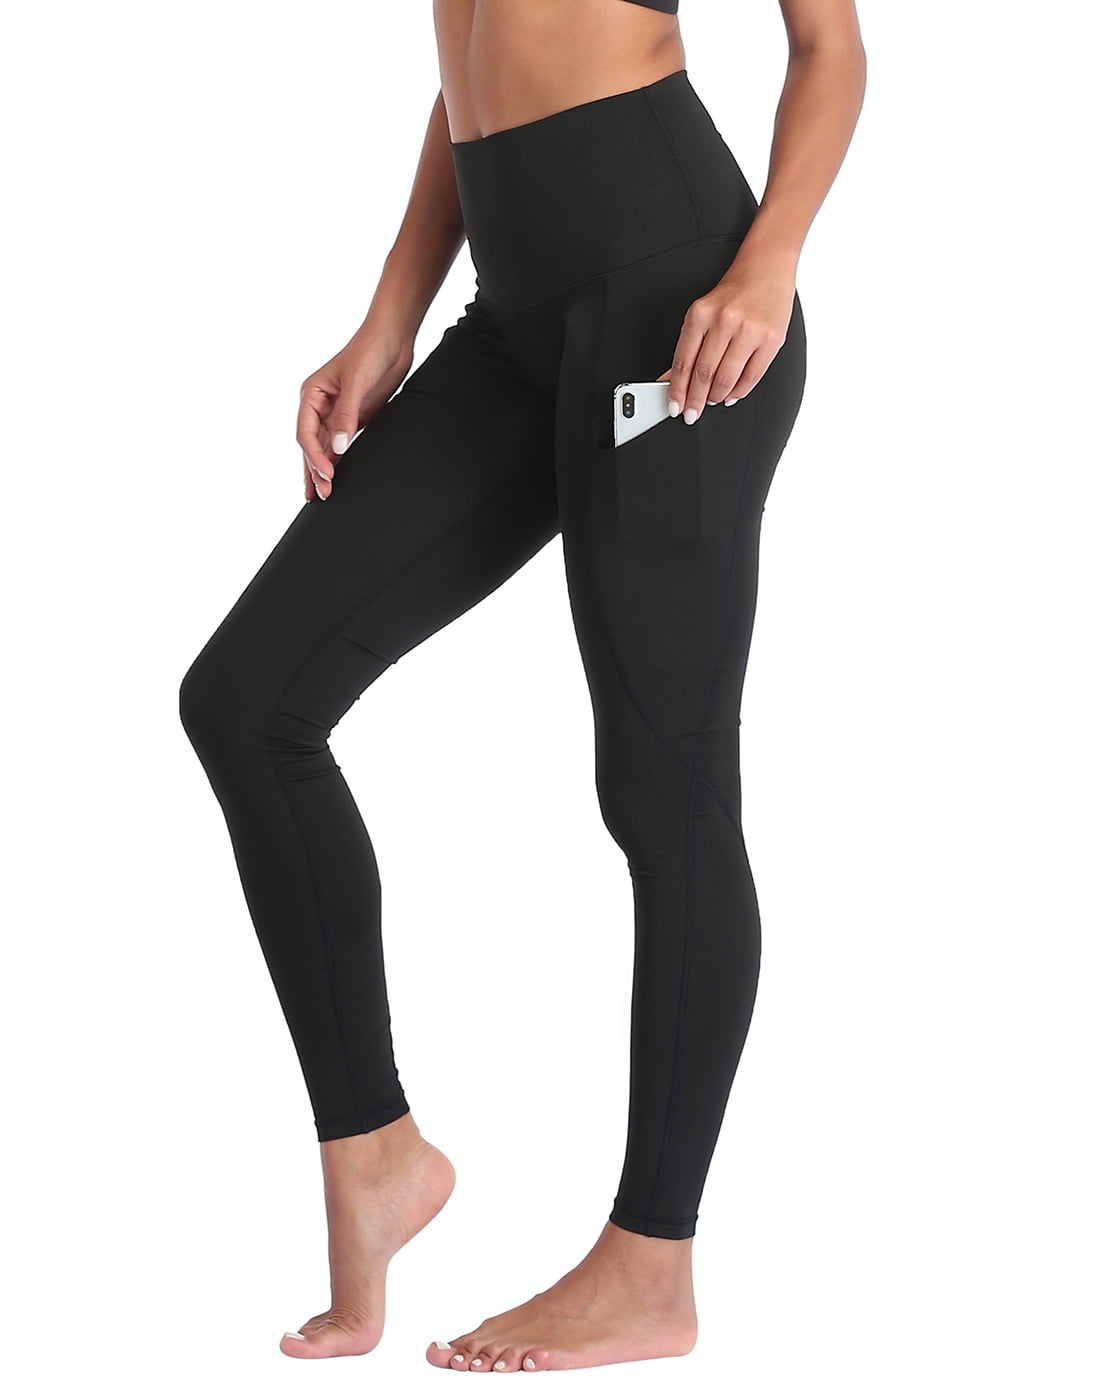 Not applicable Extra Soft Yoga Pants with Pockets Non See-Through High Waist Workout Leggings 